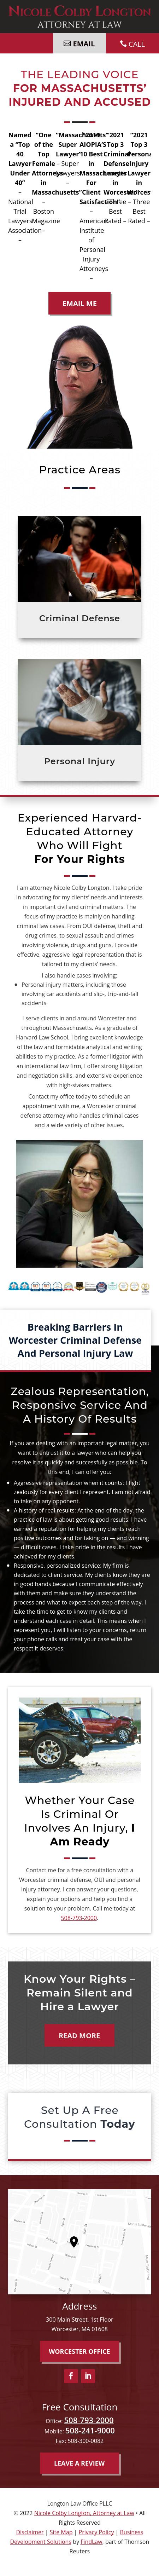 Nicole Colby Longton, Attorney at Law - Worcester MA Lawyers